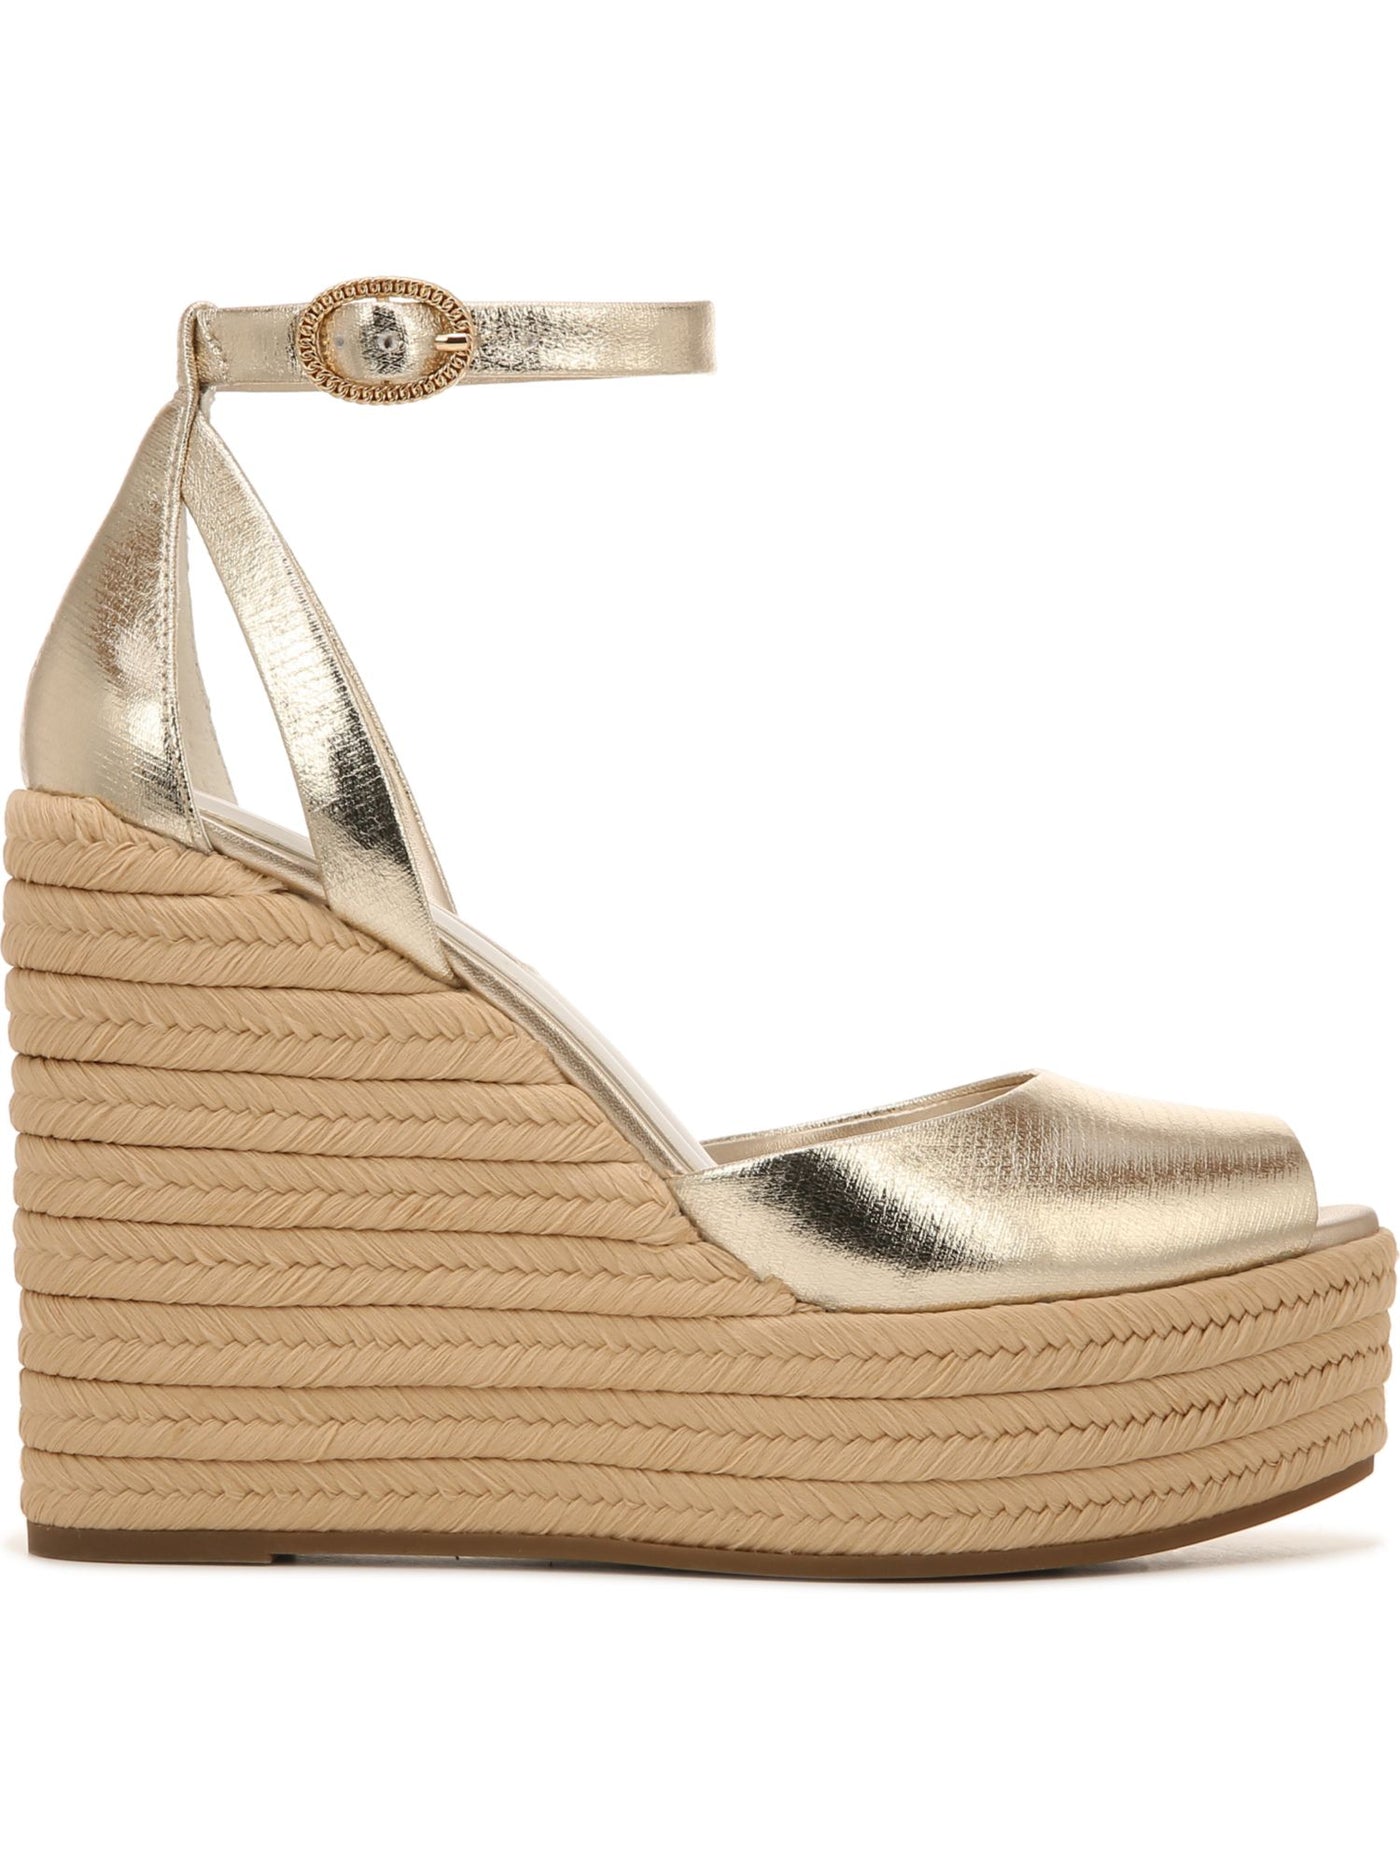 FRANCO SARTO Womens Gold 1-1/2" Platform Cut Out Ankle Strap Padded Paige Almond Toe Wedge Buckle Espadrille Shoes 8.5 M